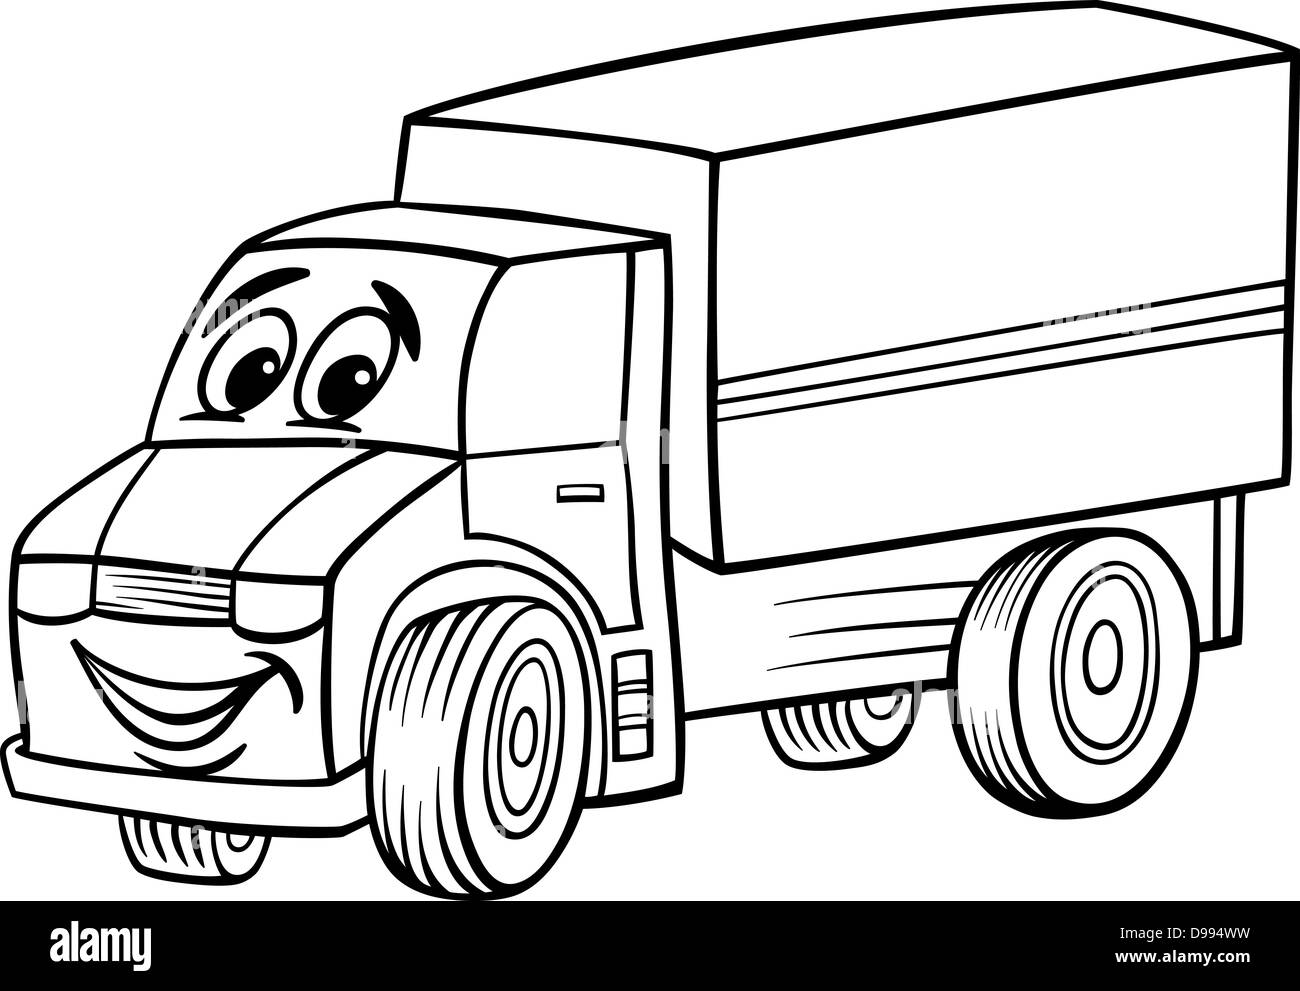 Black and White Cartoon Illustration of Funny Truck or Lorry Car Vehicle  Comic Mascot Character for Coloring Book for Children Stock Photo - Alamy